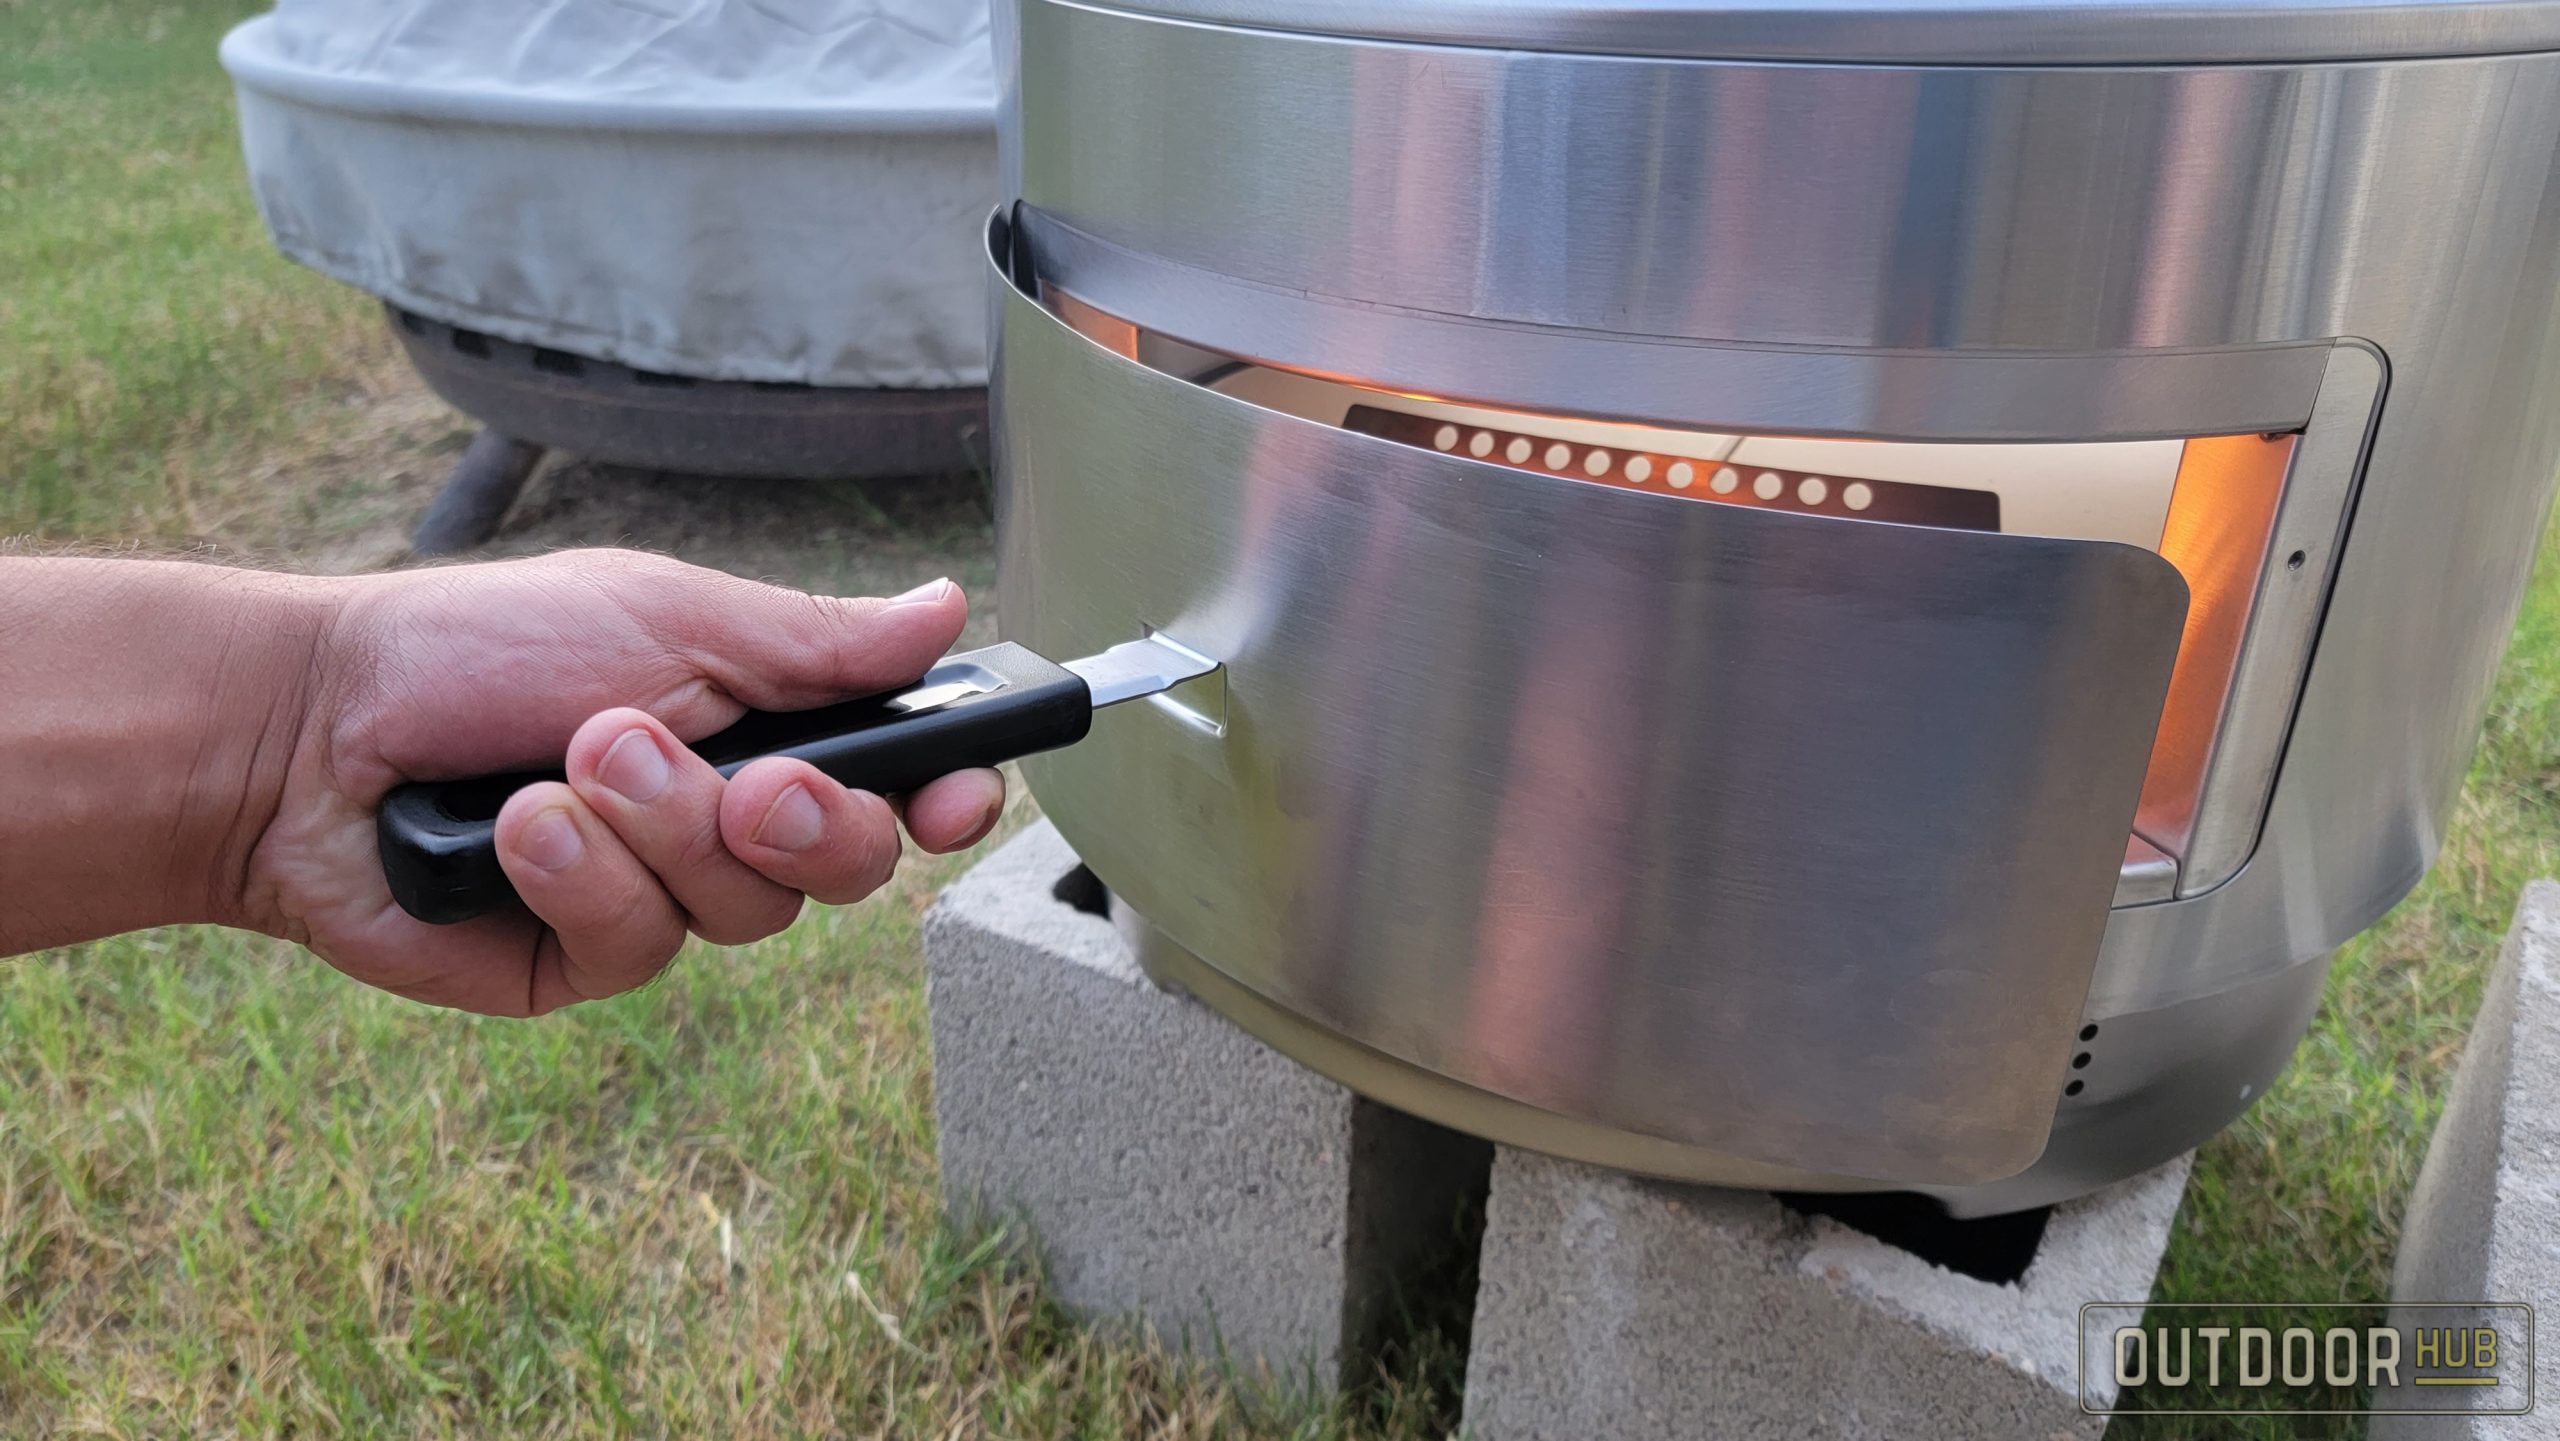 REVIEW: The Solostove Pi Wood-Fired Pizza Oven